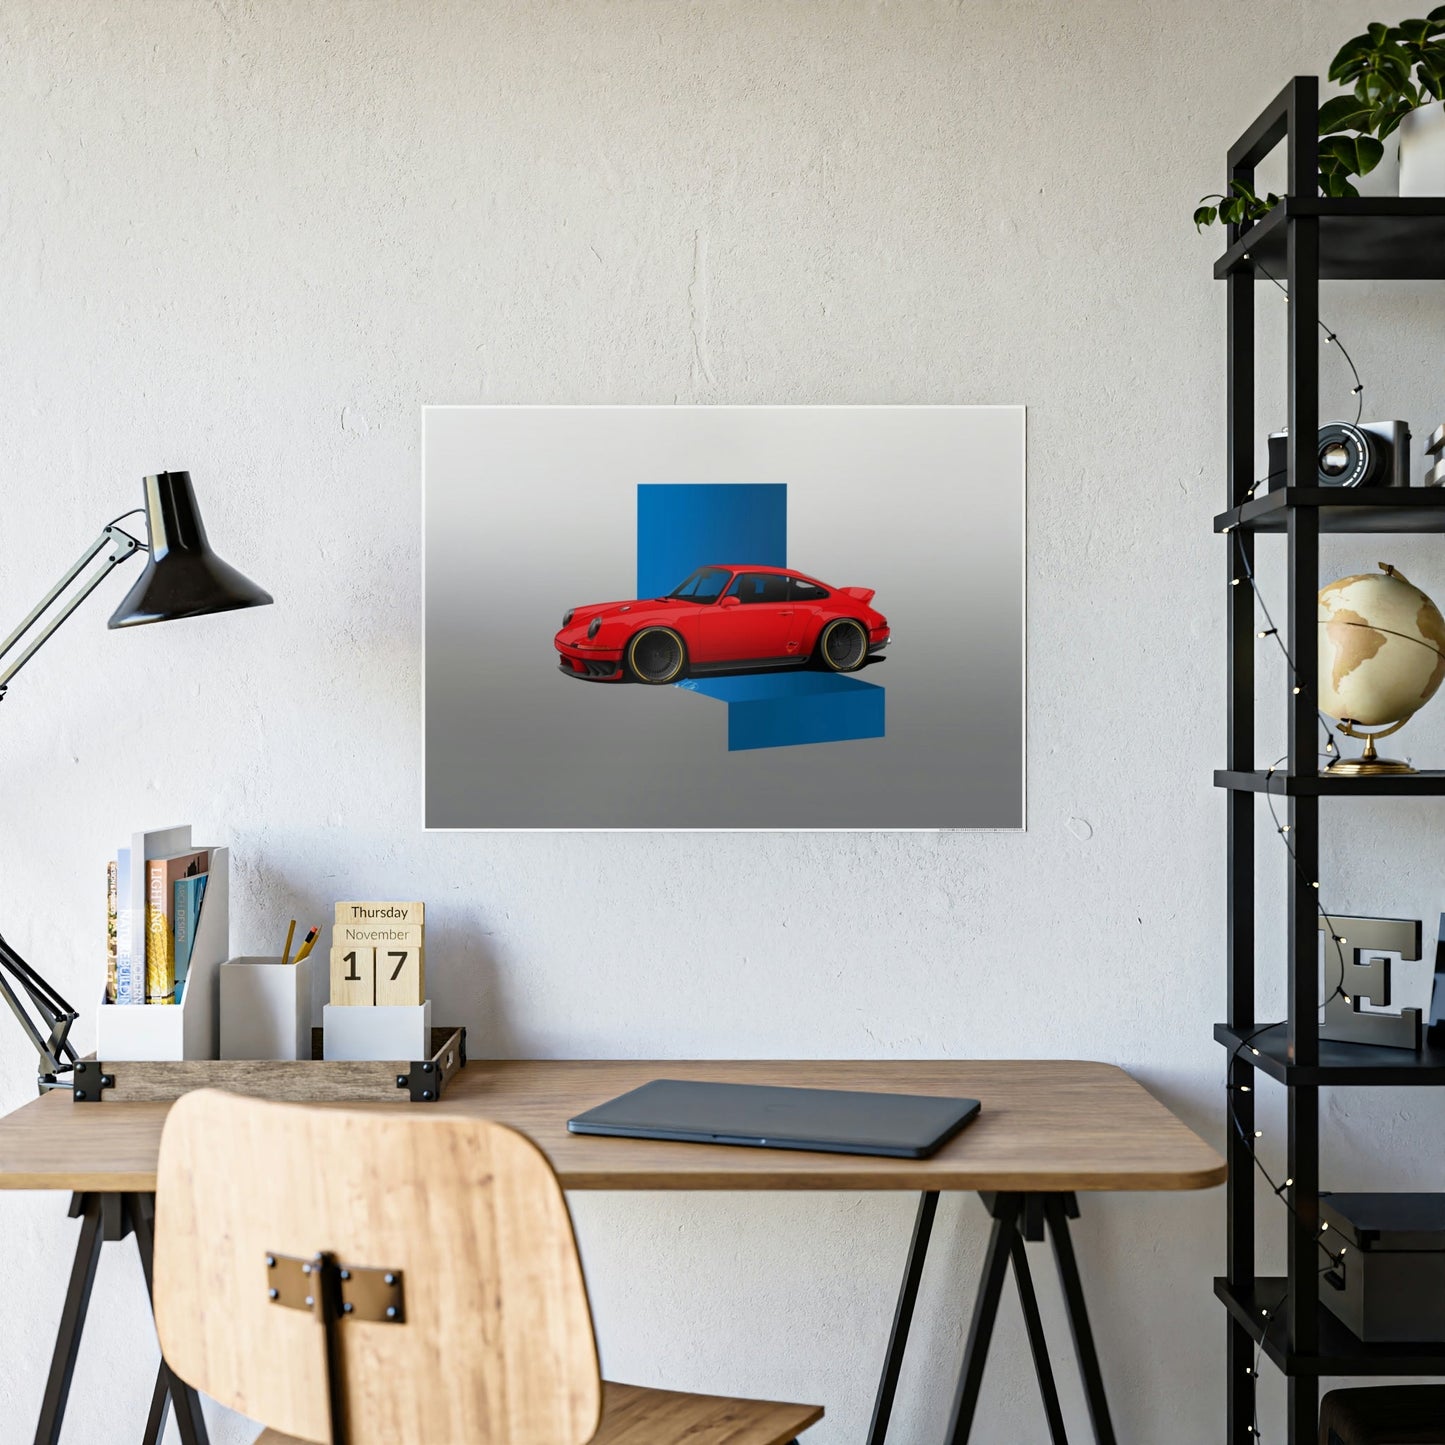 The Art of Speed: A Framed Canvas Print of a Red Porsche in Action